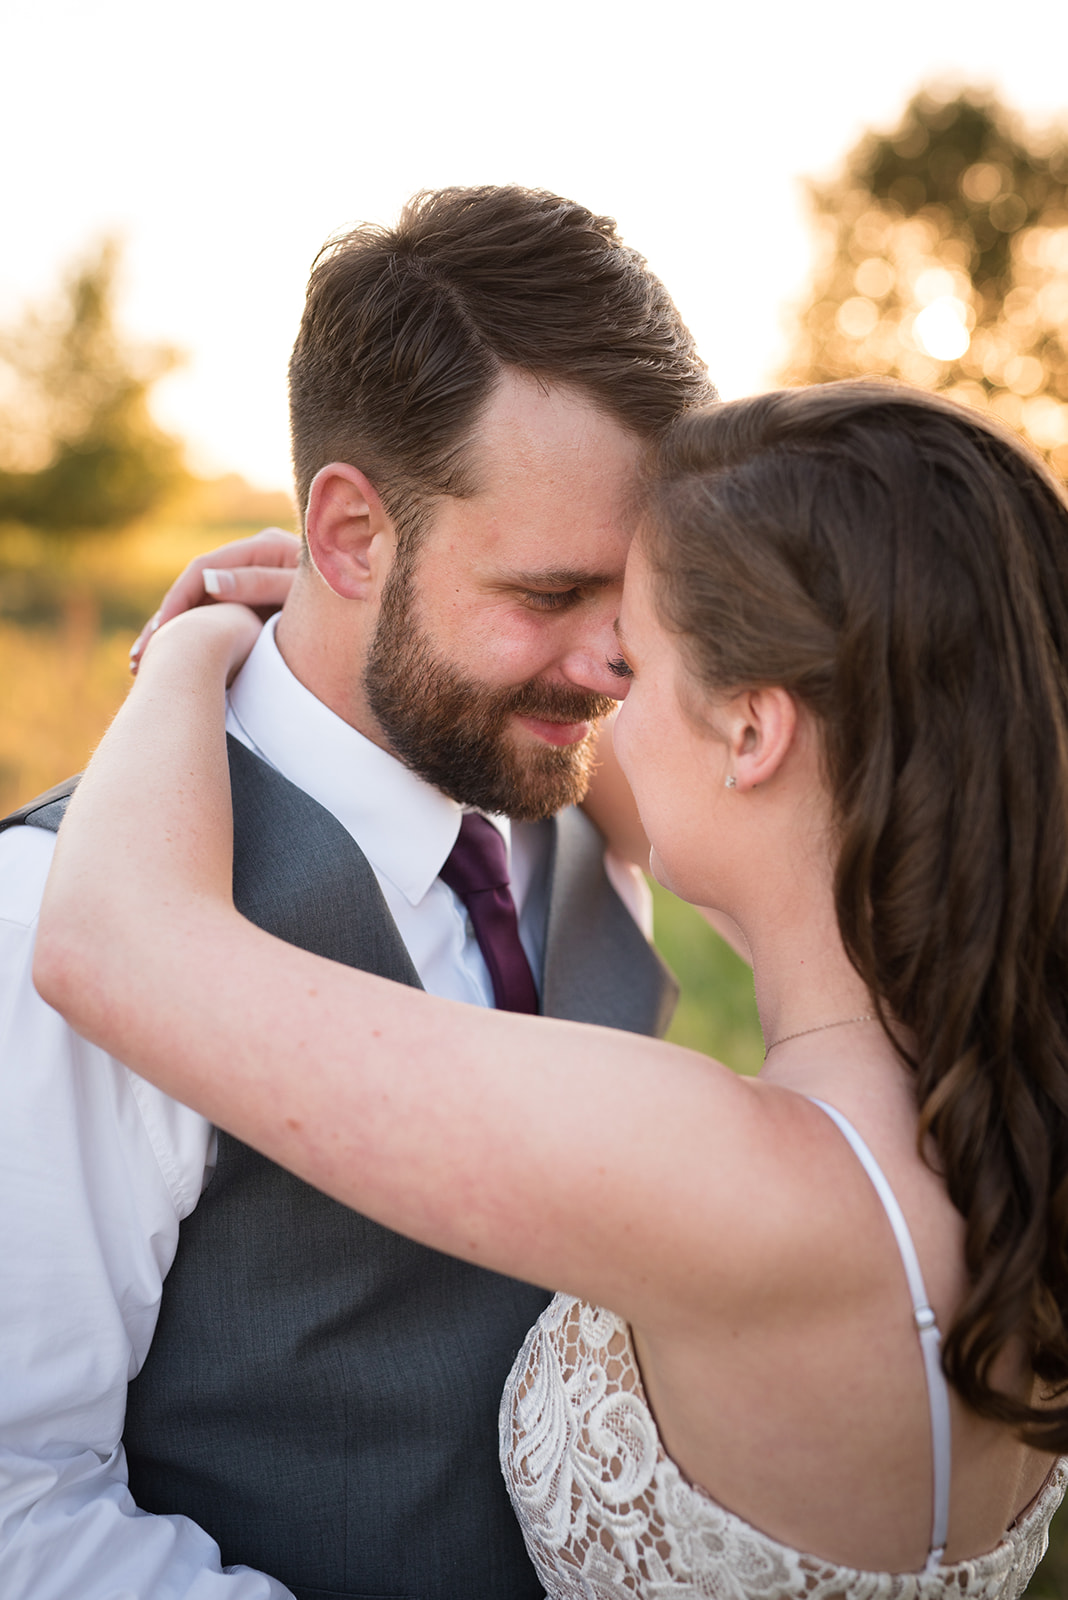 Bride and groom embrace during golden hour right before sunset at Erickson Farmstead in Isanti MN